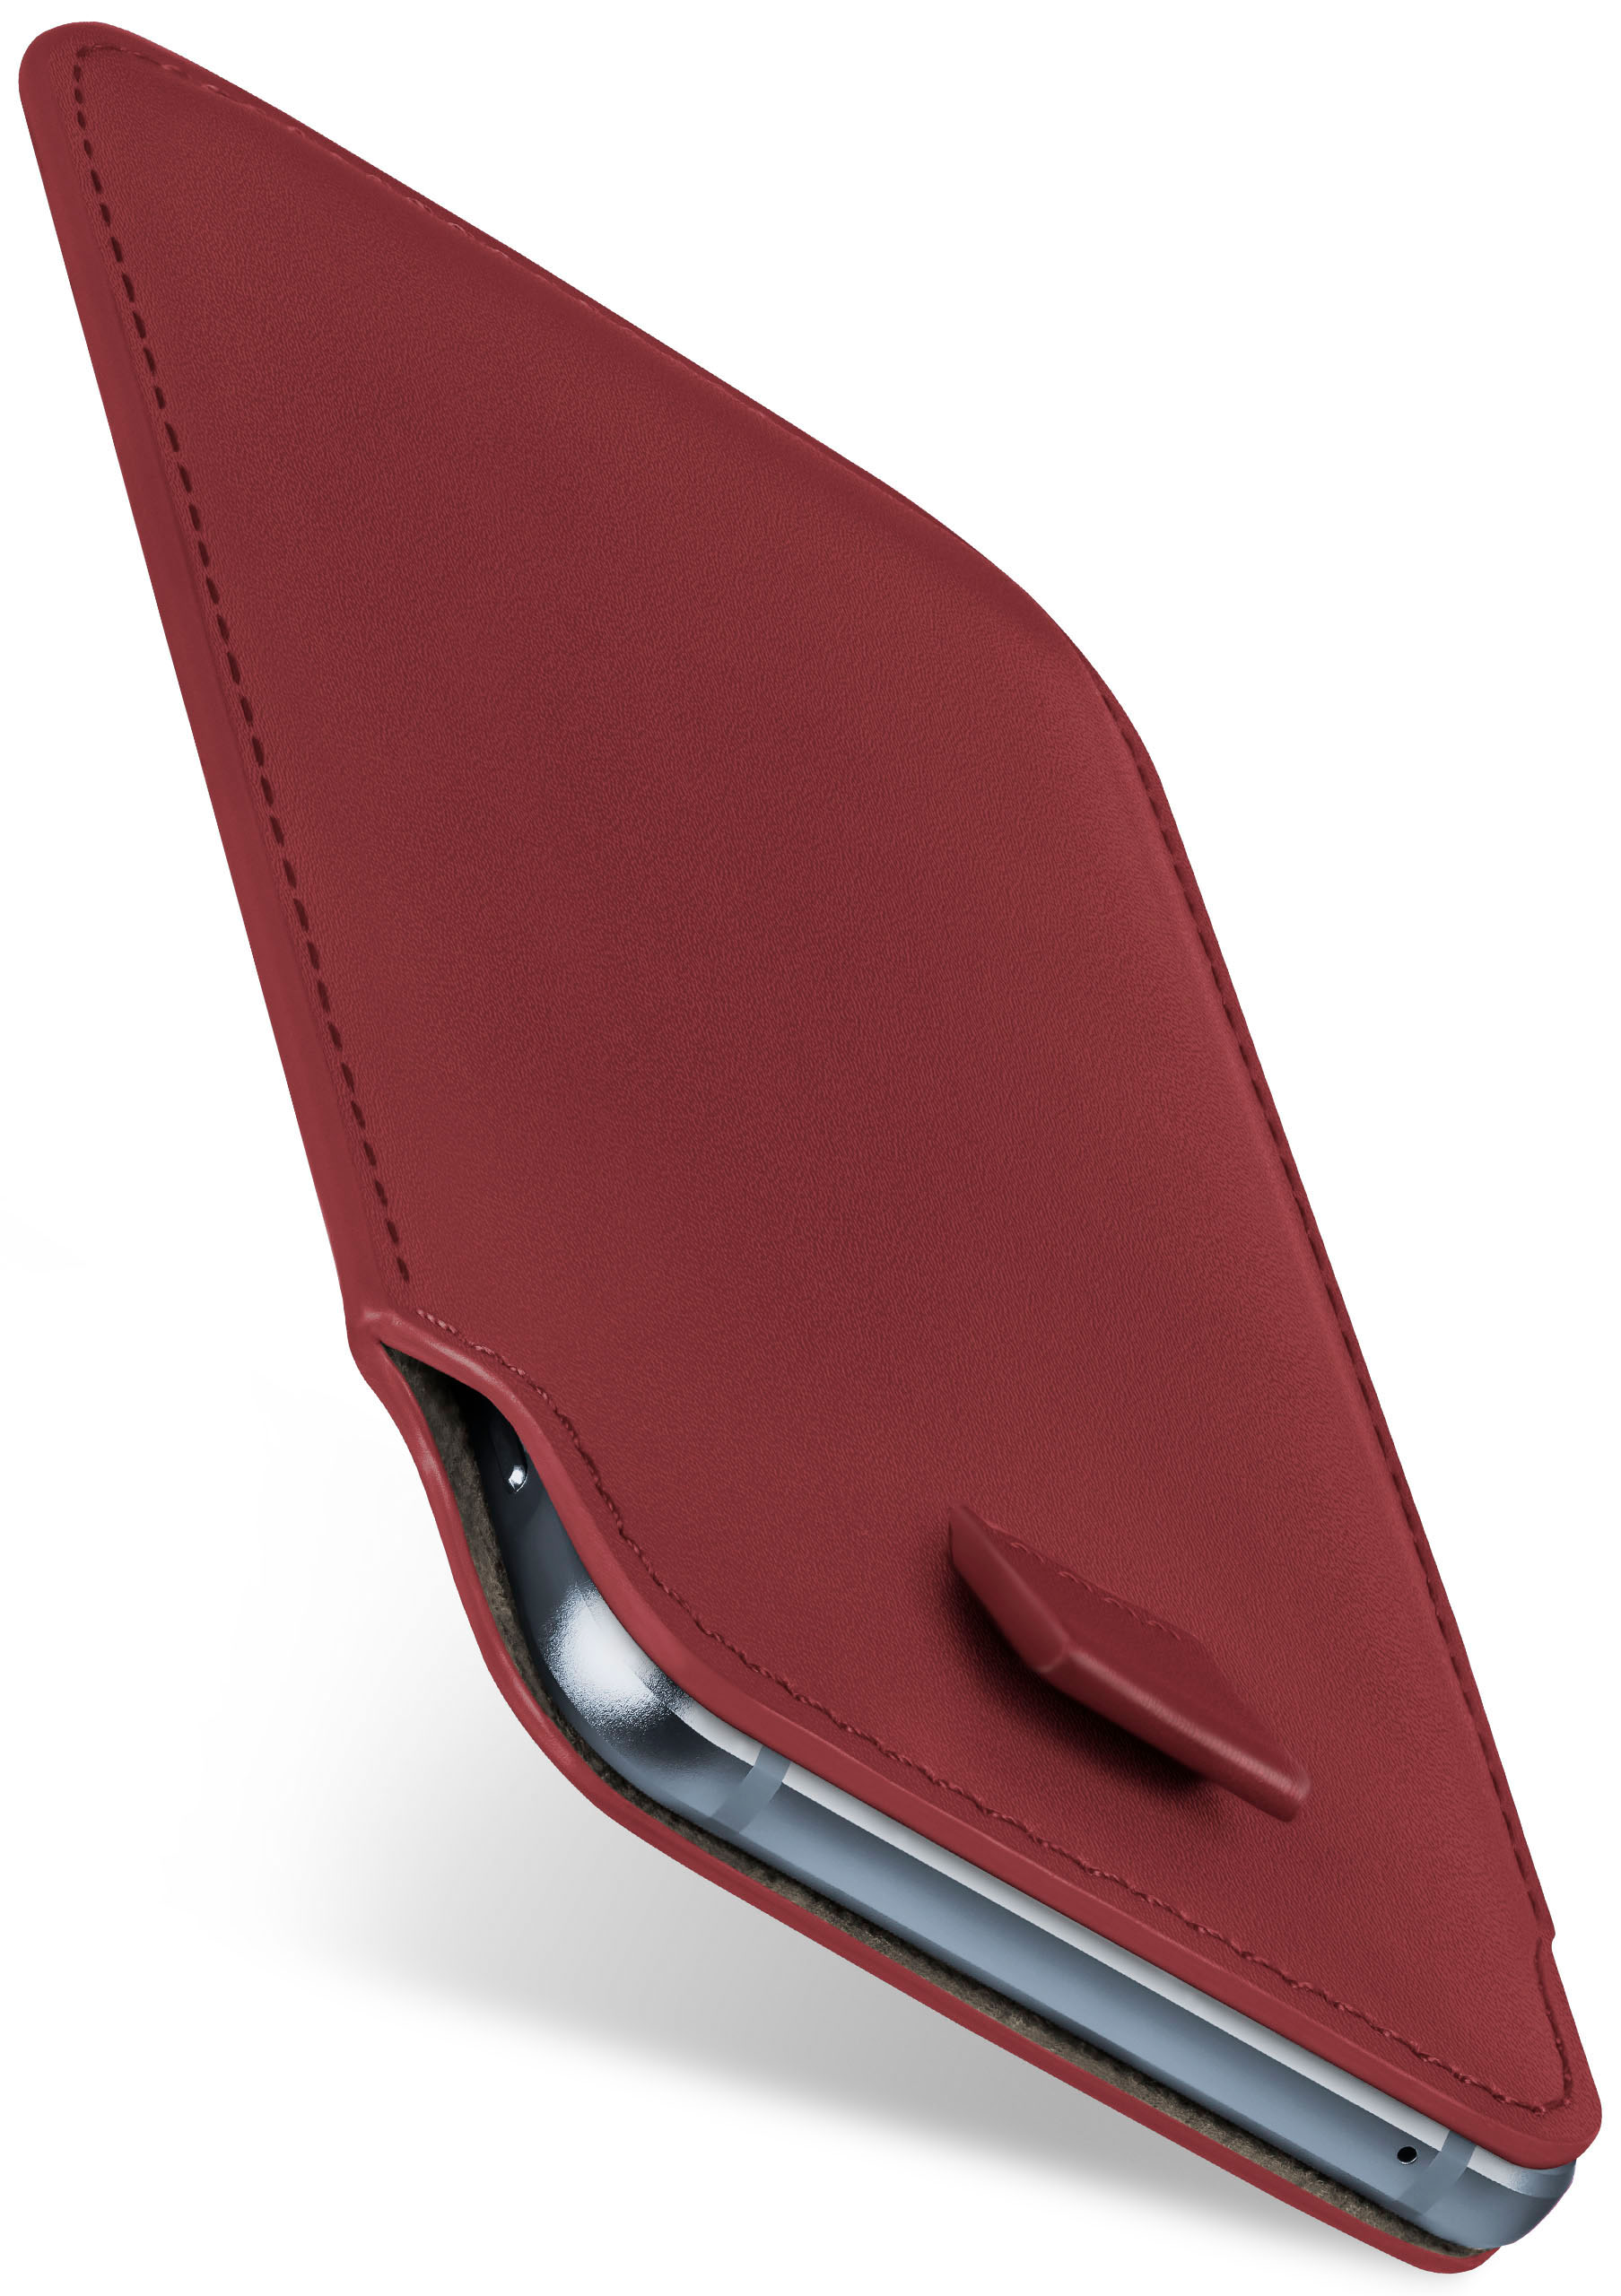 Case, S8, Samsung, Full Galaxy Slide Maroon-Red Cover, MOEX